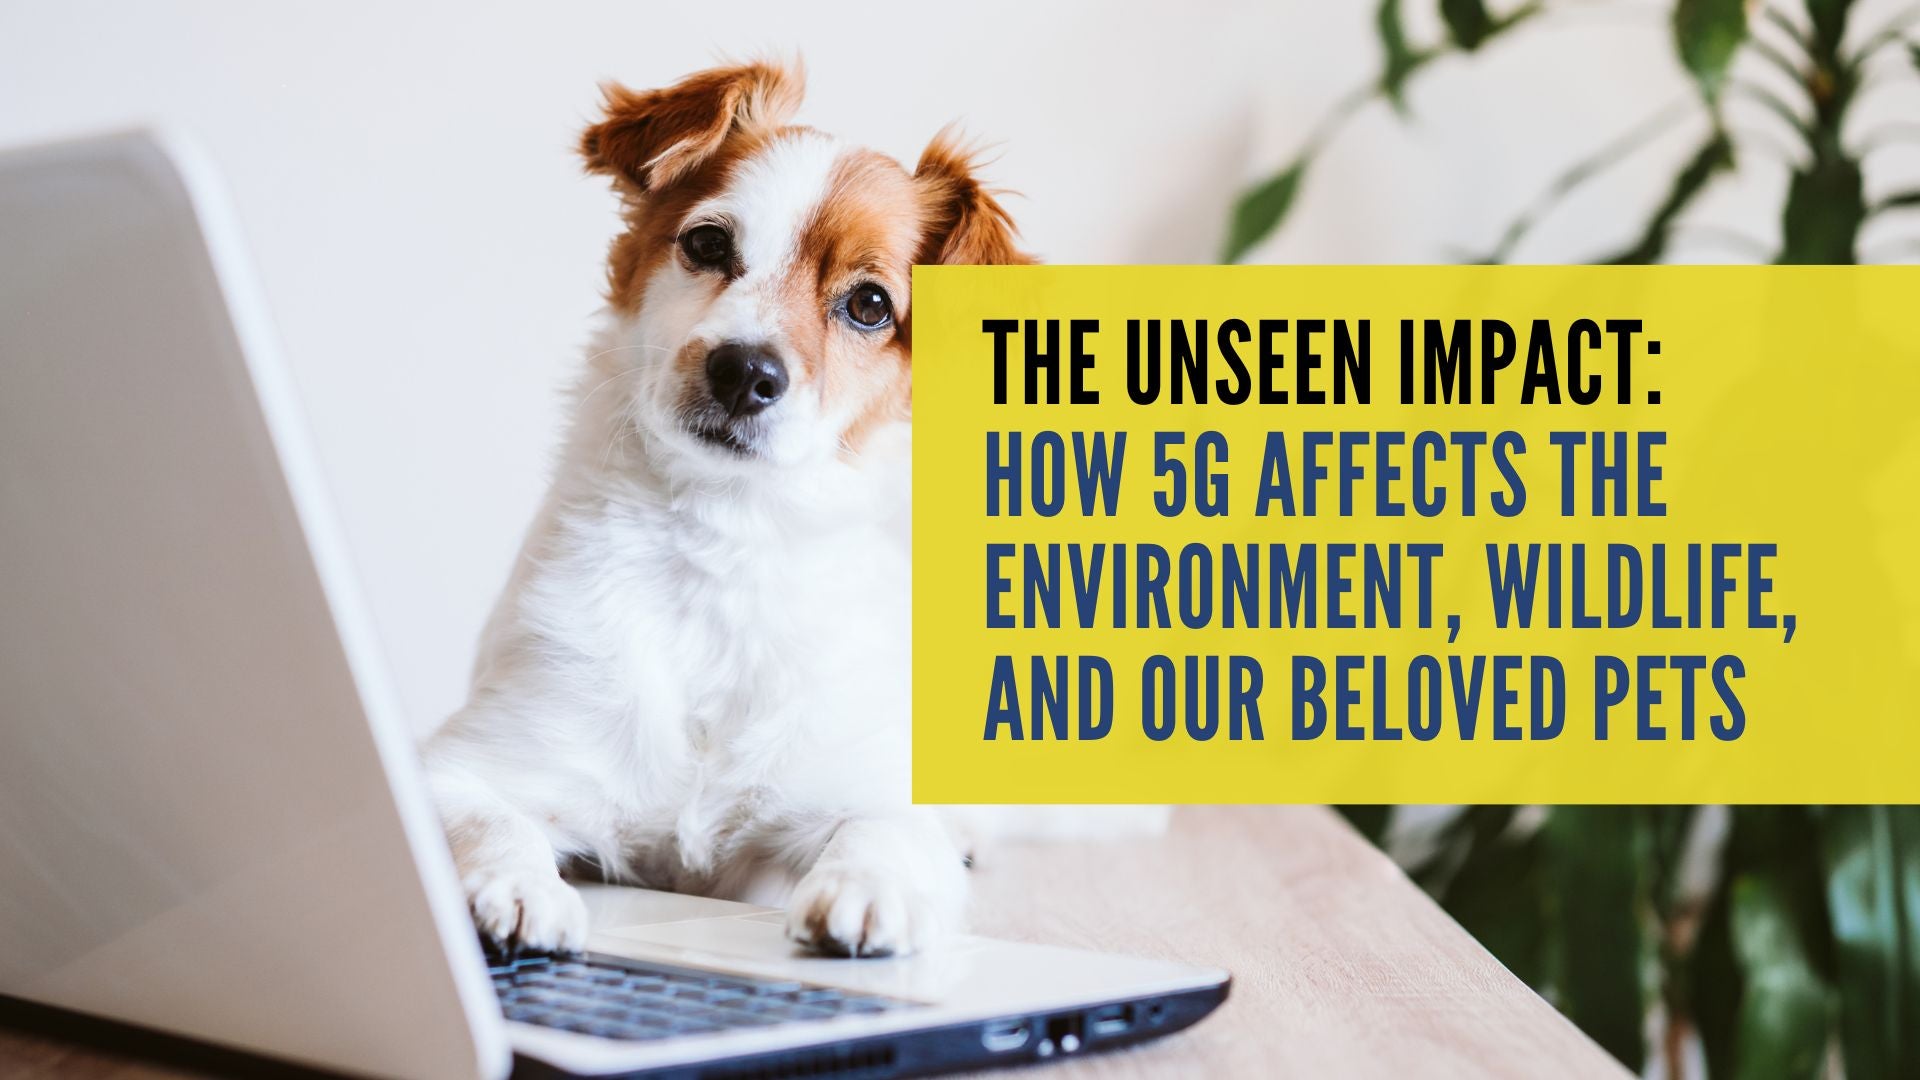 The Unseen Impact: How 5G Affects the Environment, Wildlife, and Your Beloved Pets